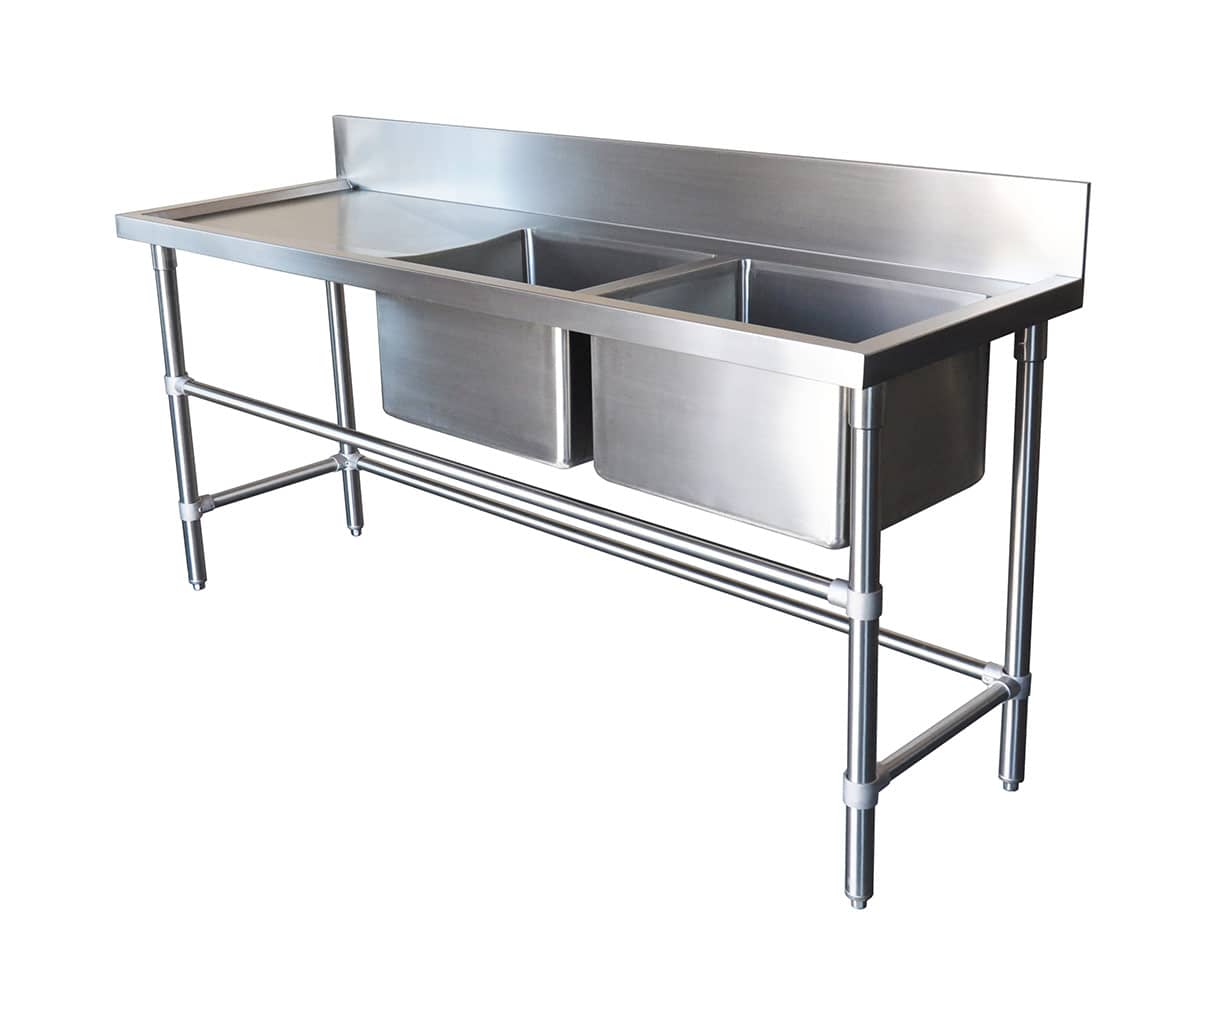 Double Bowl Stainless Commercial Sink – Left Bench, 1900 x 610 x 900mm high